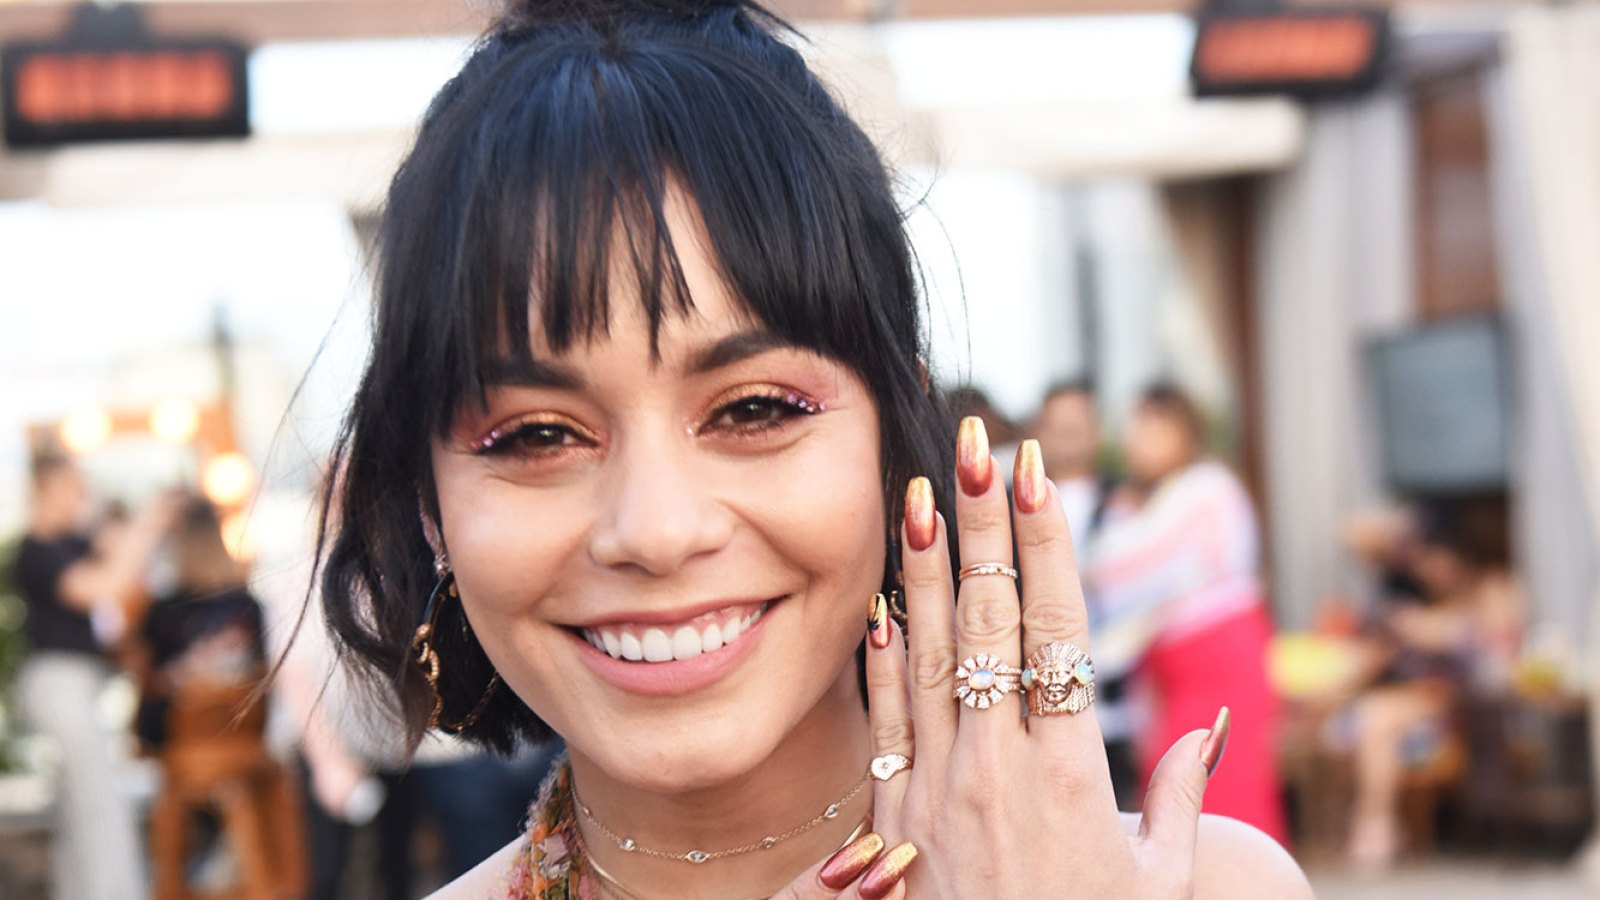 Vanessa Hudgens Doesn't Think You Should Spend Too Much Time Taking Selfies at Coachella, Shares Style and Beauty Tips